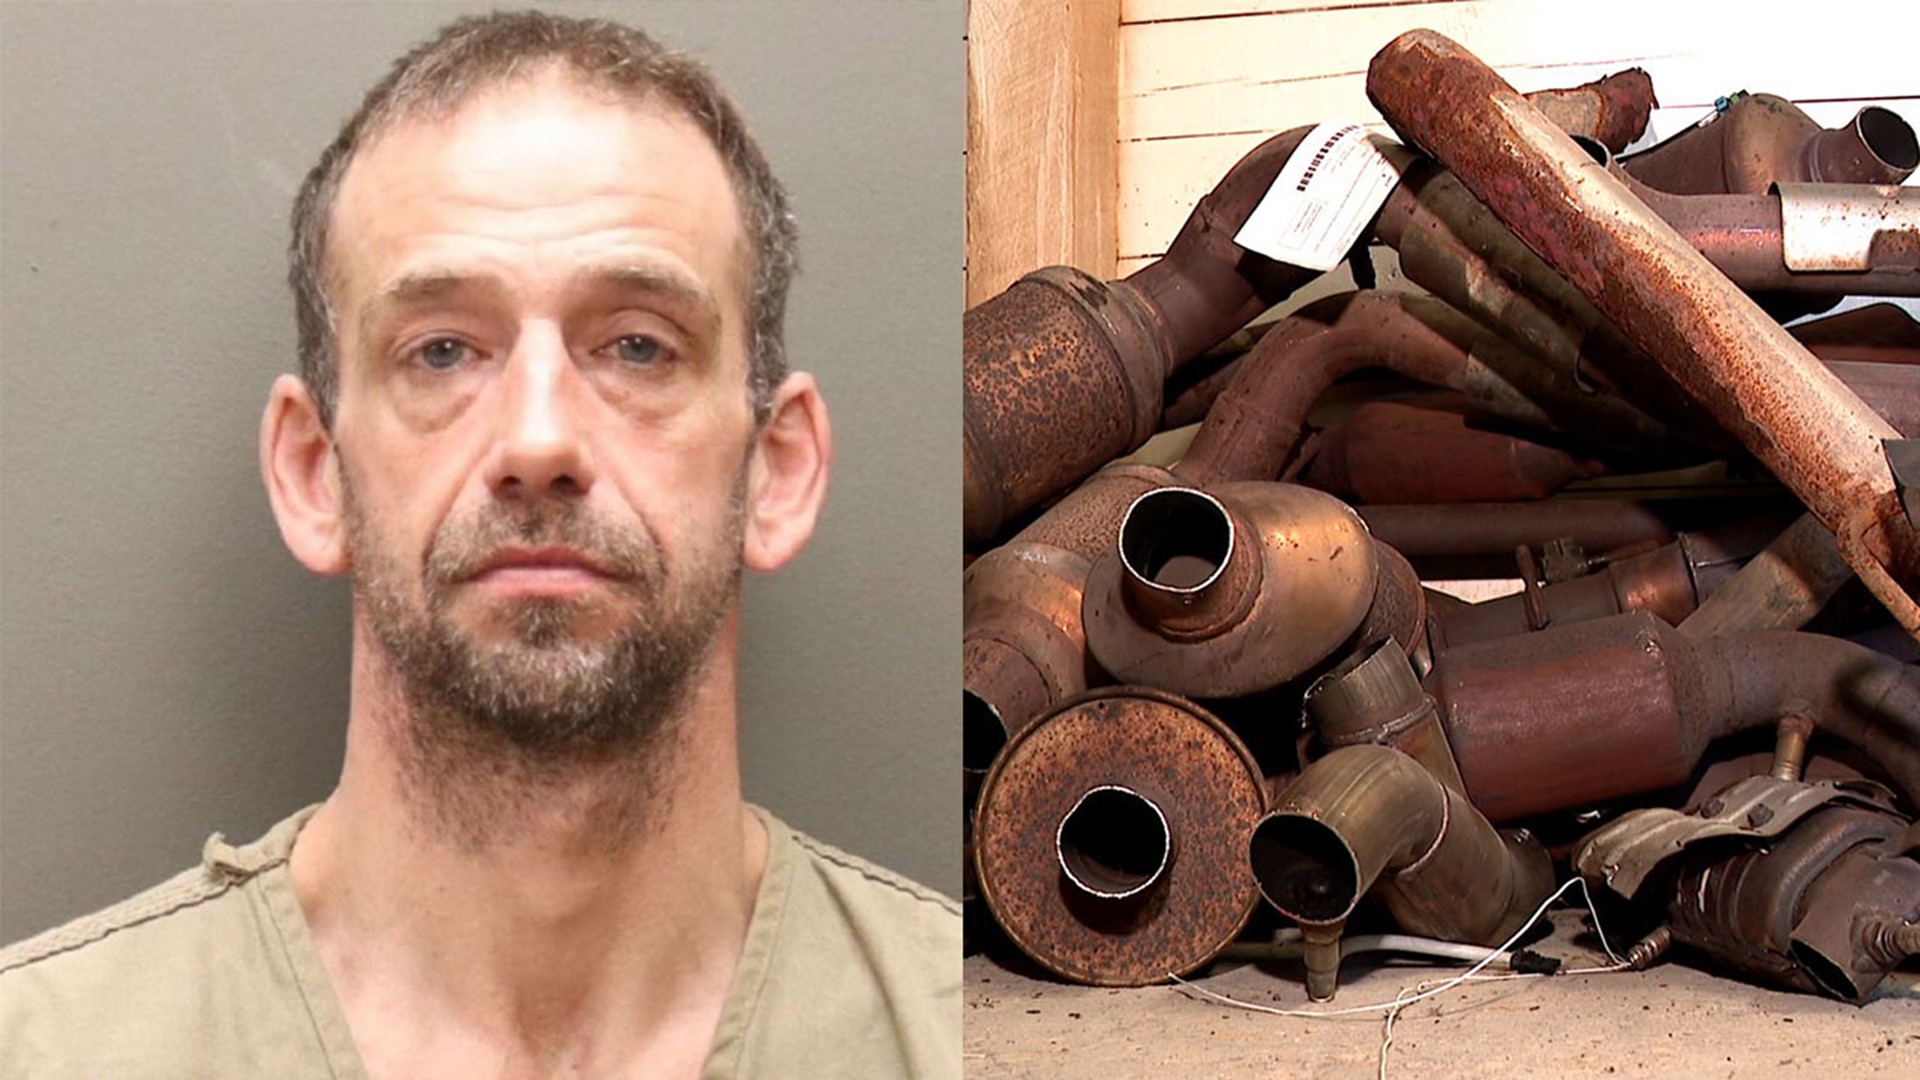 Tommy Cox was sentenced after pleading guilty to 15 felonies in connection with a string of catalytic converter thefts in Columbus.